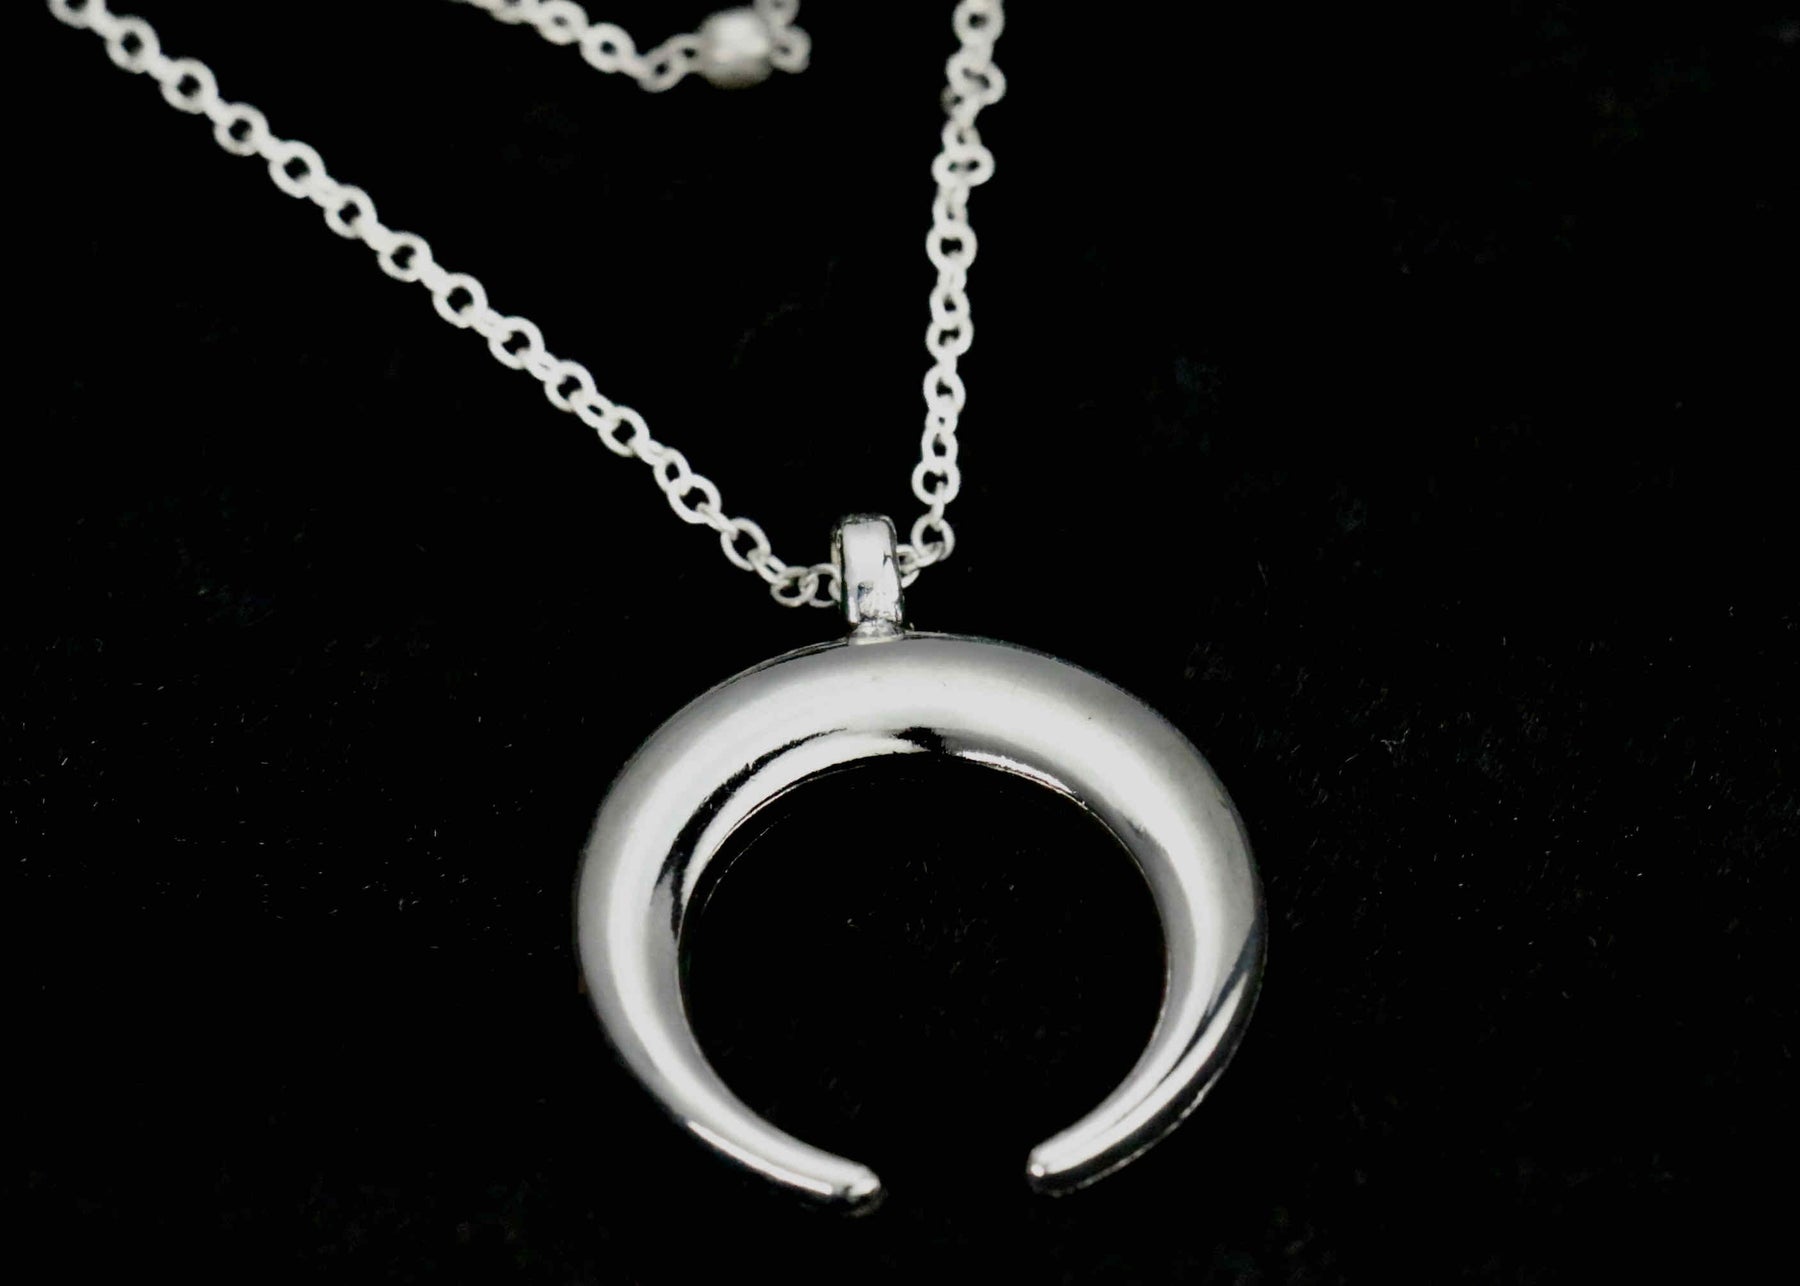 Silver   Chain with Crescent Moon Valentine Day Gift for Women & Men, Silver   Chain Necklace by Aria Jeweler